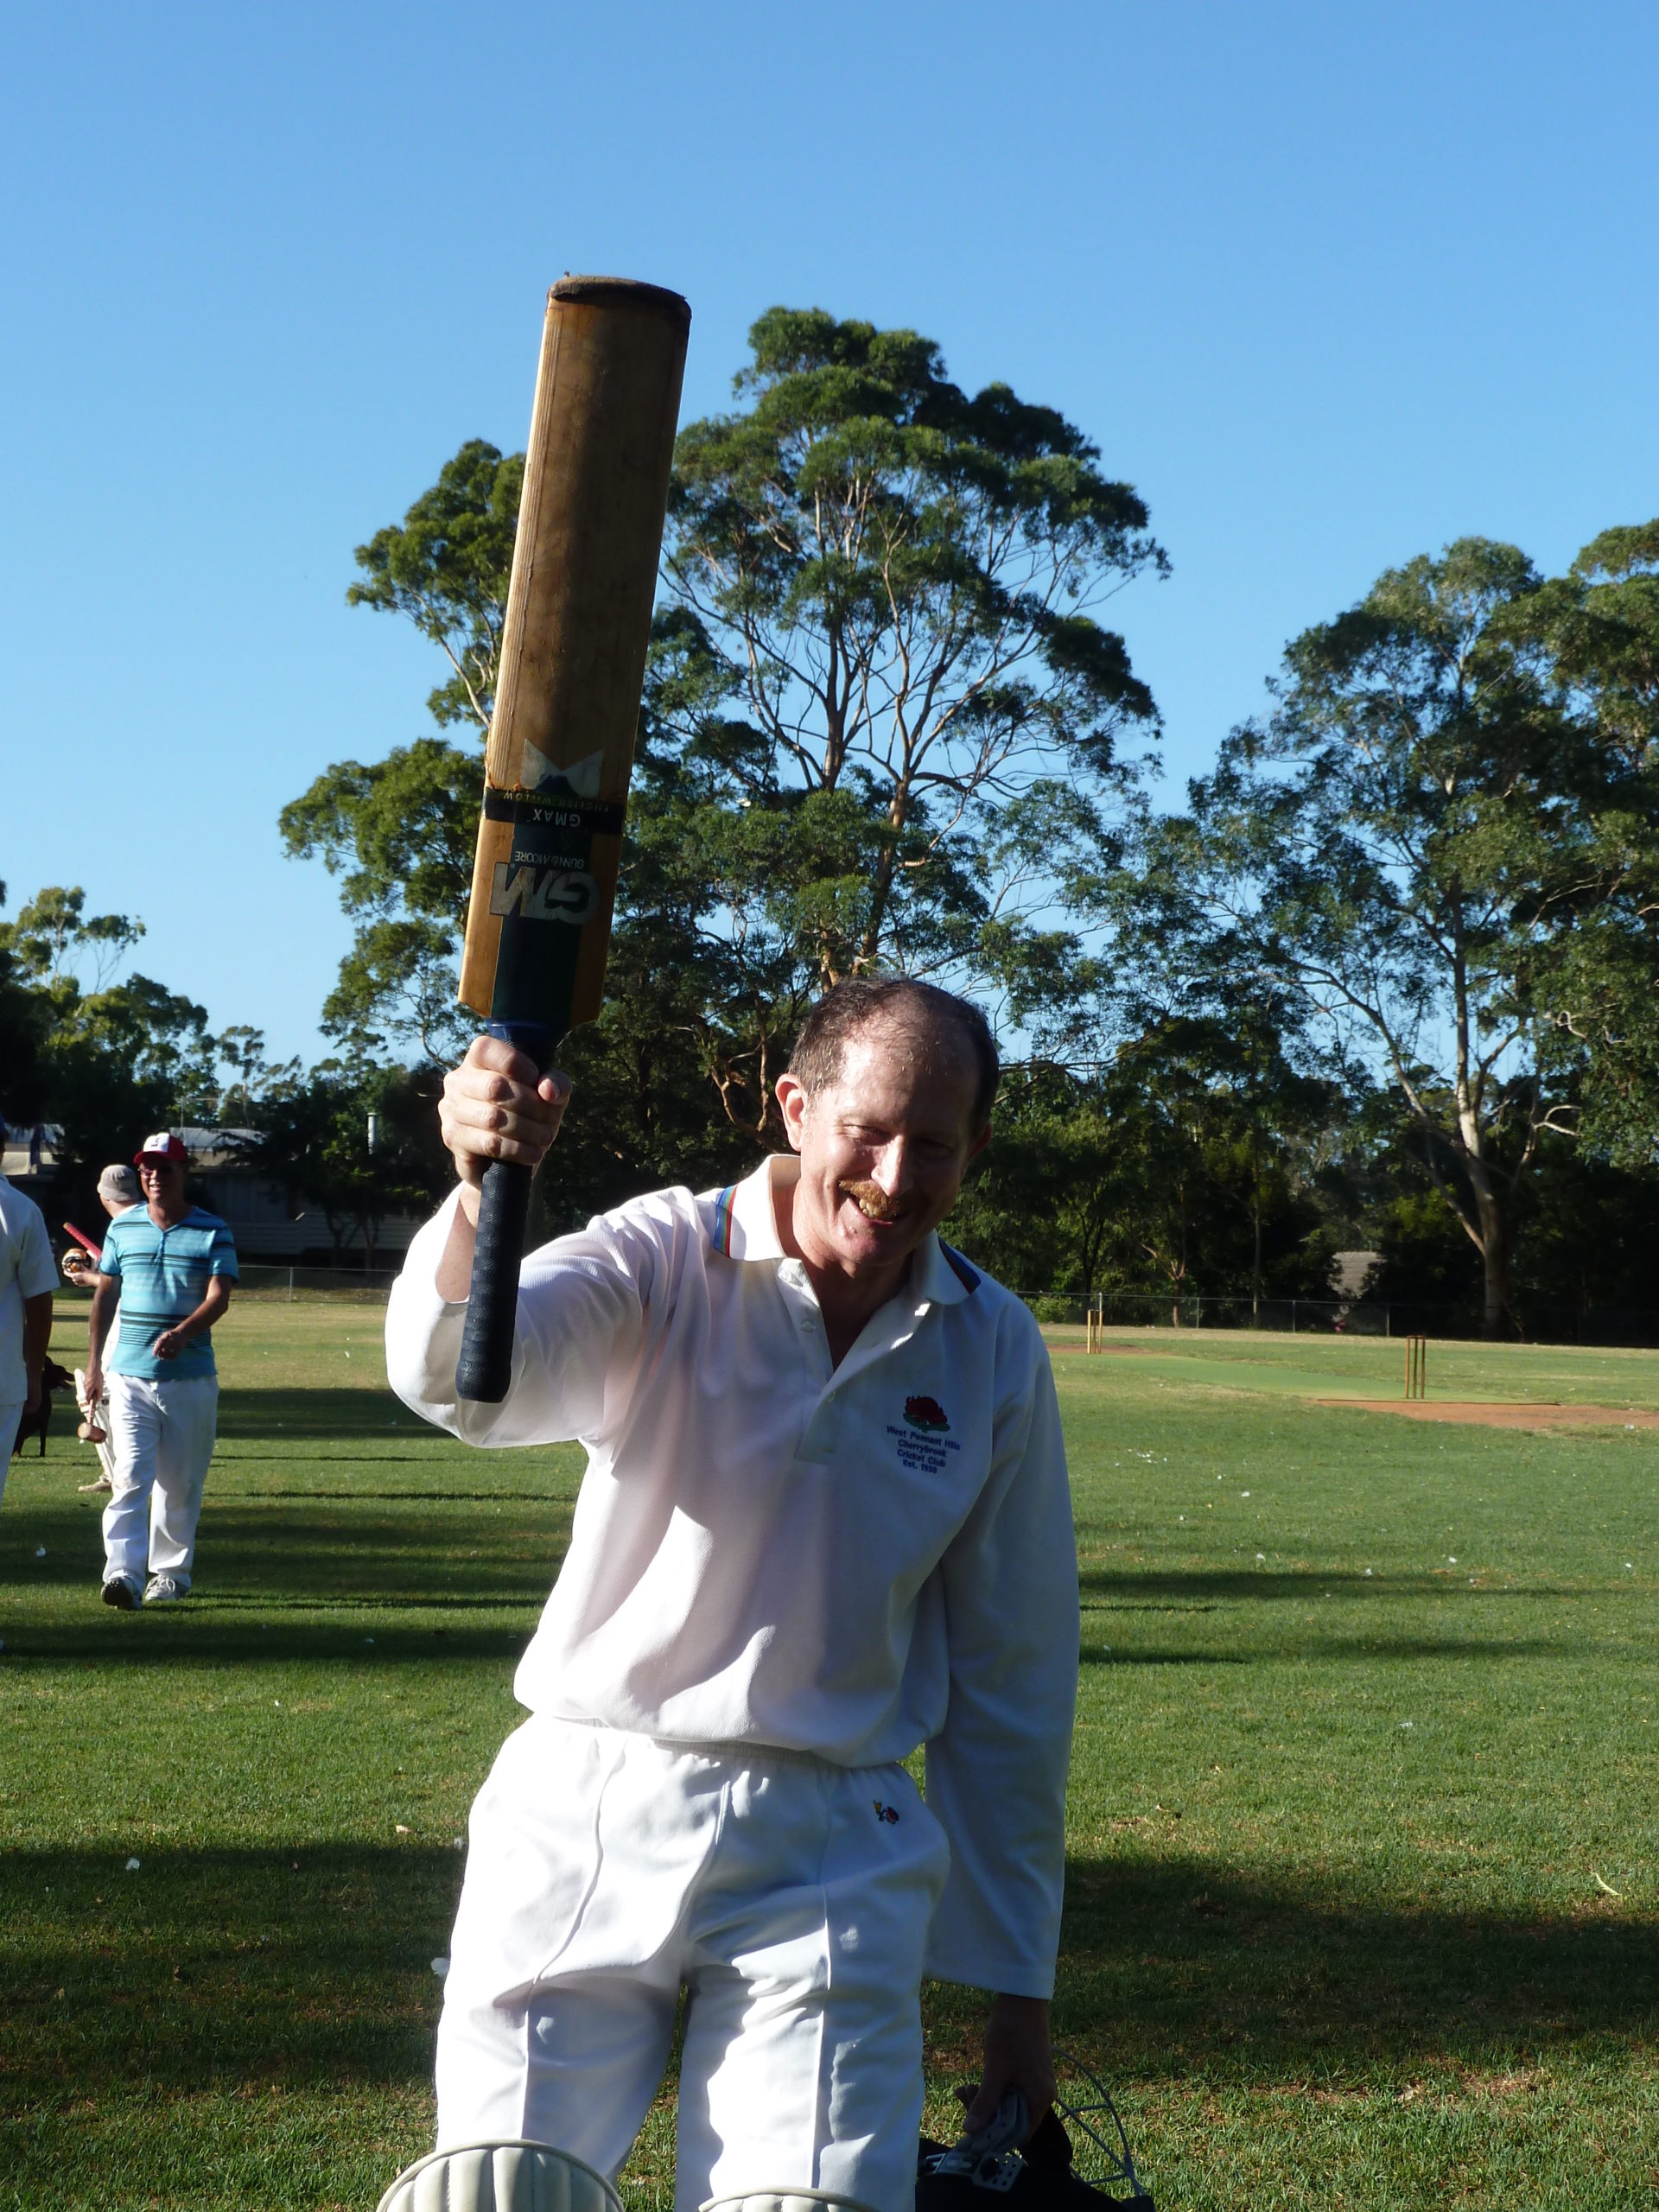 Peter Westerberg on scoring his 100th run in his 99th innings January 2011